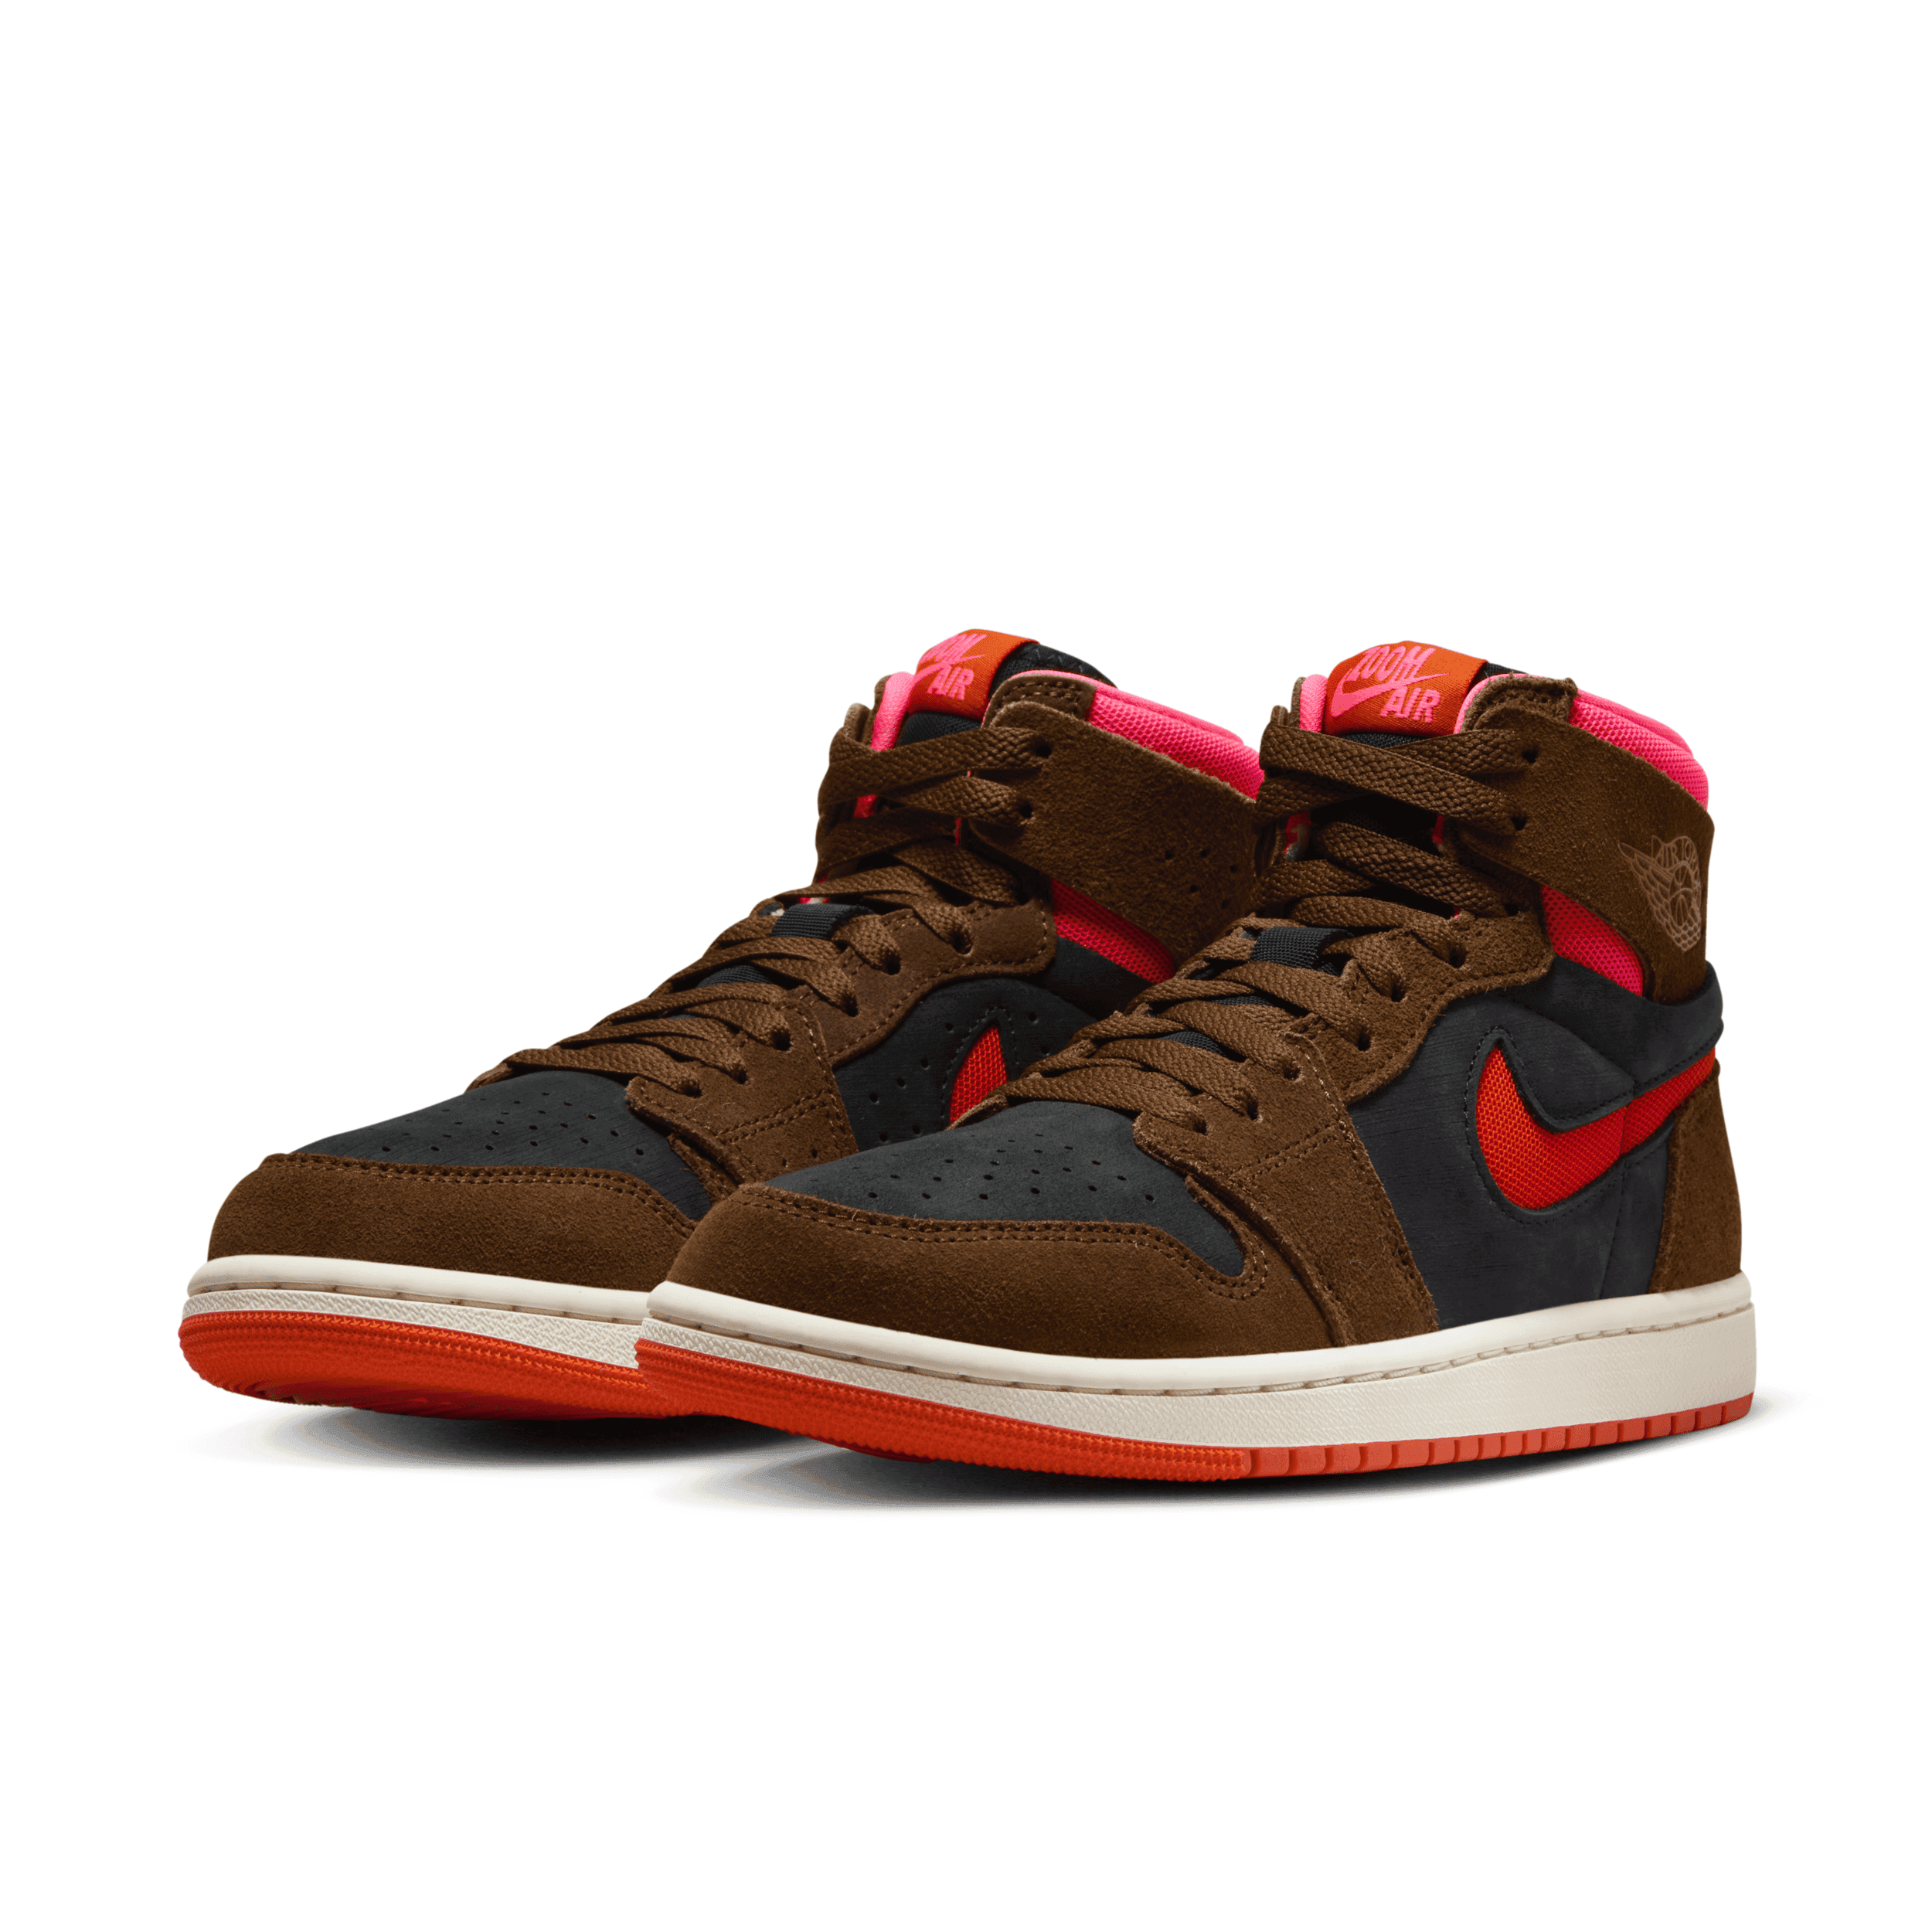 Air Jordan 1 High Zoom Comfort 2 Cacao Wow Picante Red (W) - DV1305-206  Raffles and Release Date